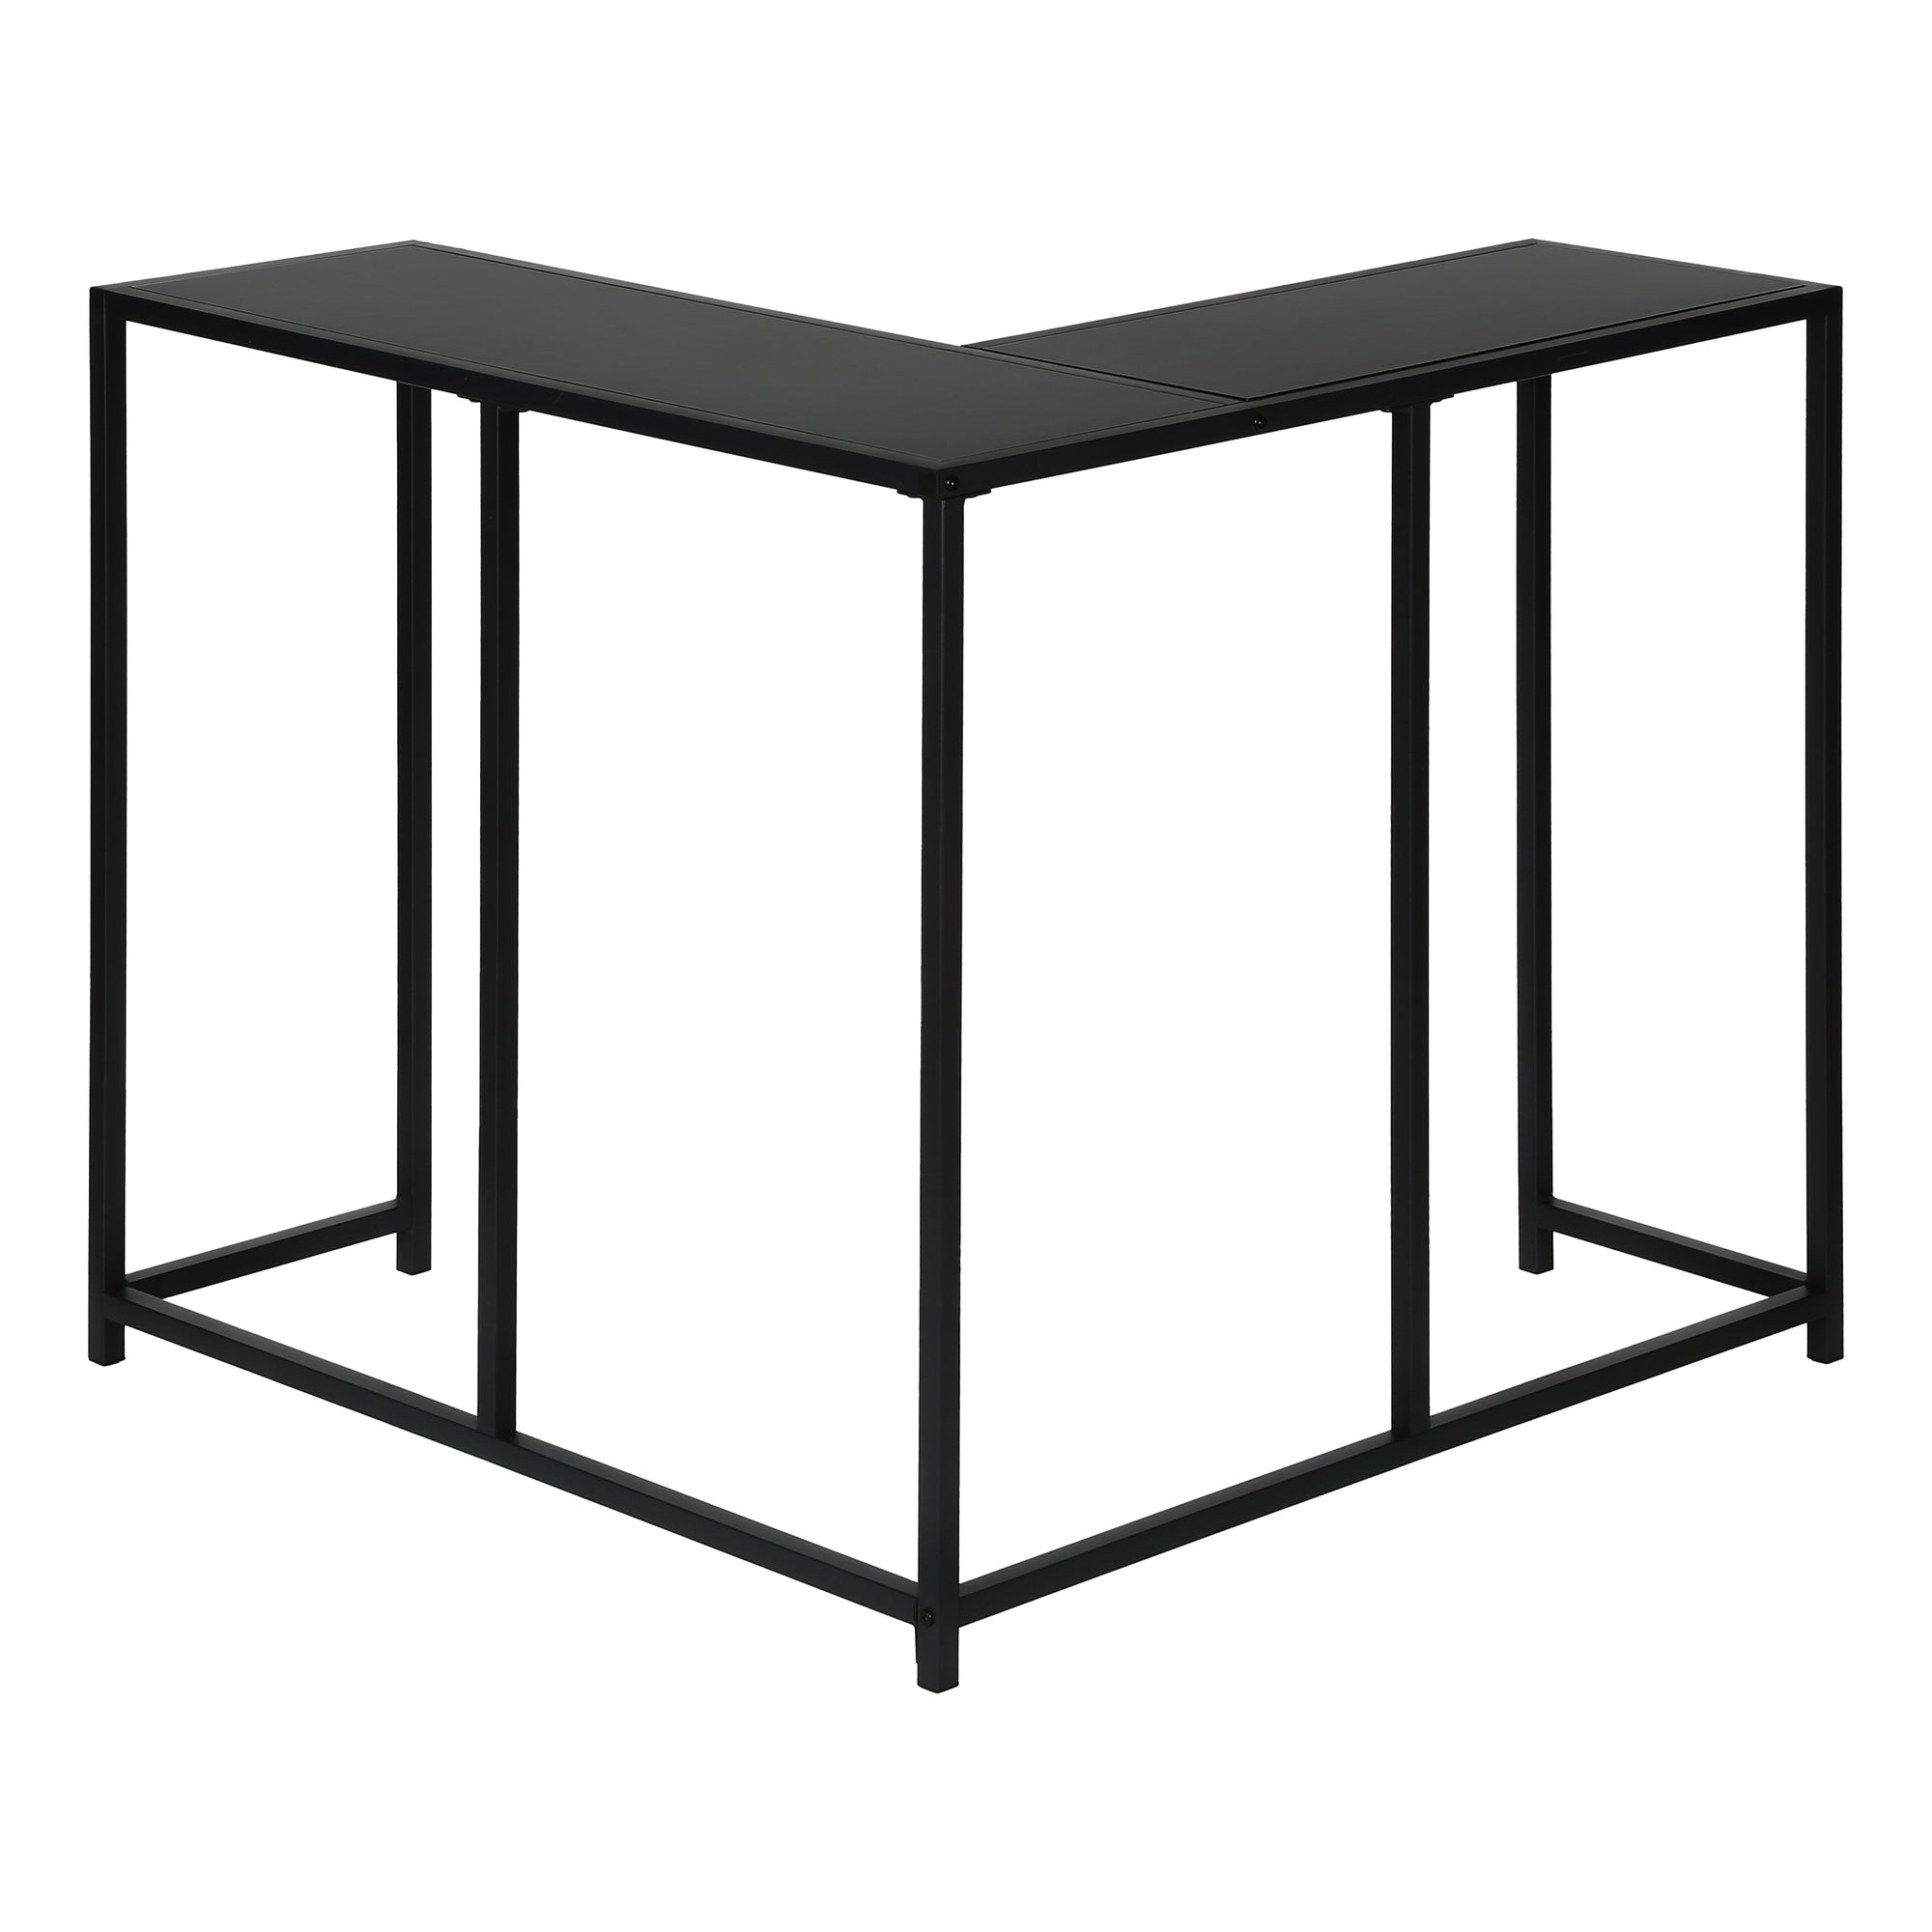 MN-302157    Accent Table, Console, Entryway, Narrow, Corner, Living Room, Bedroom, Metal Frame, Laminate, Black, Contemporary, Modern